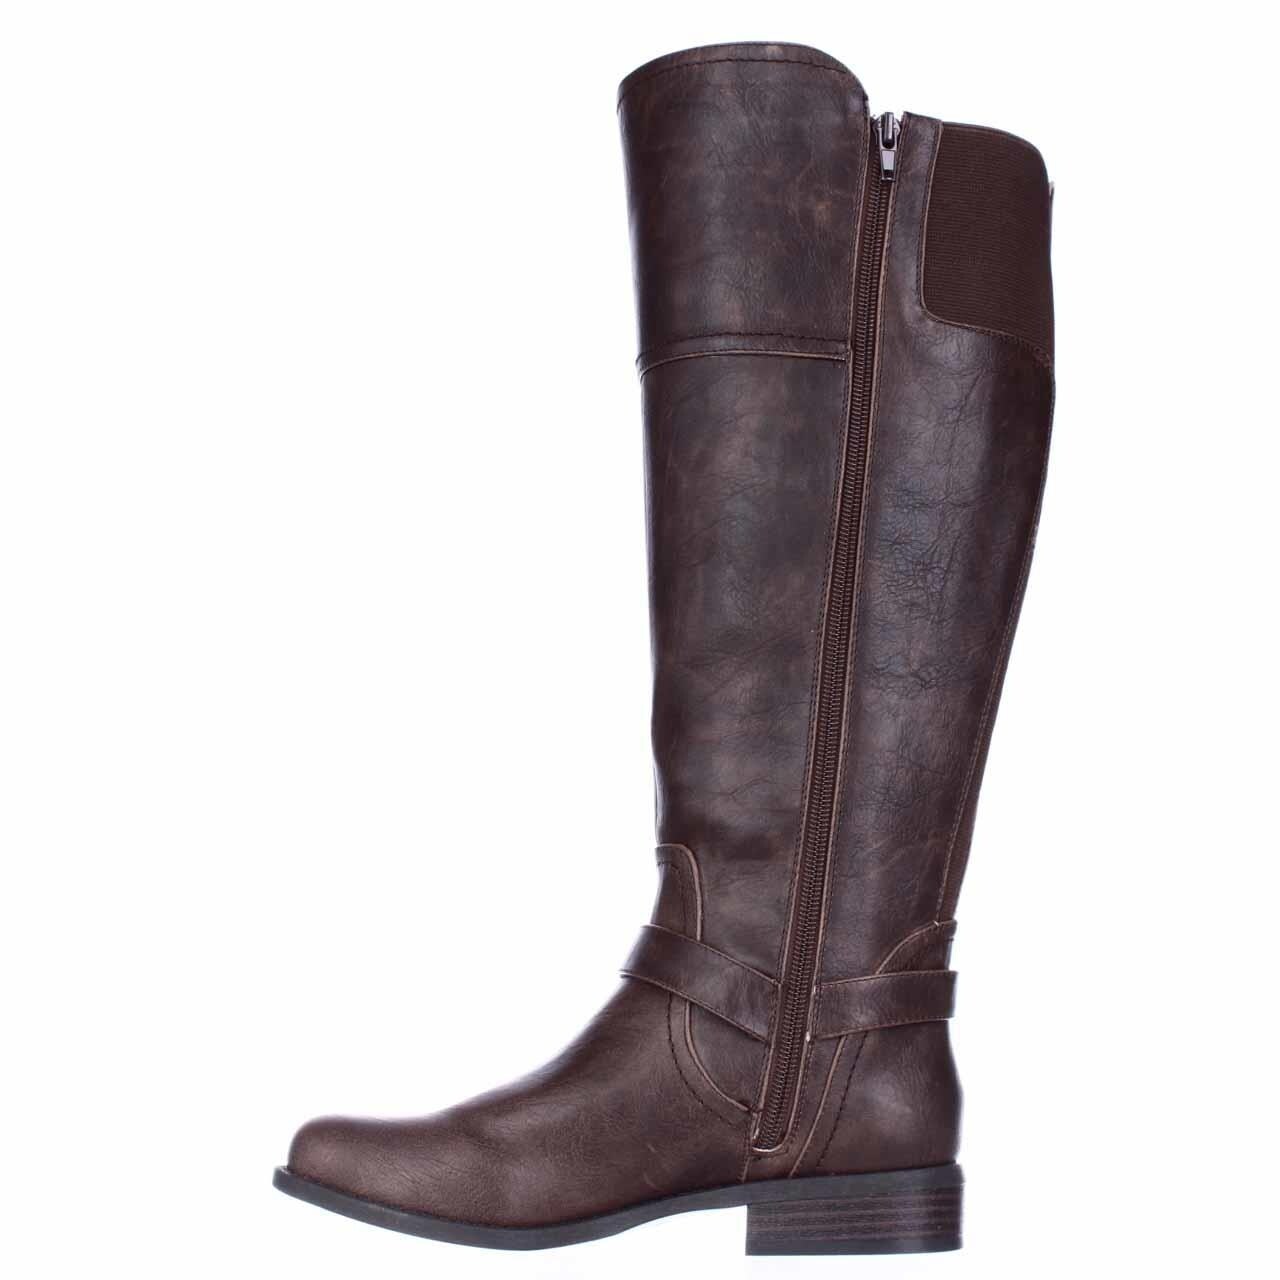 G GUESS Hailee Wide Calf Riding Boots 